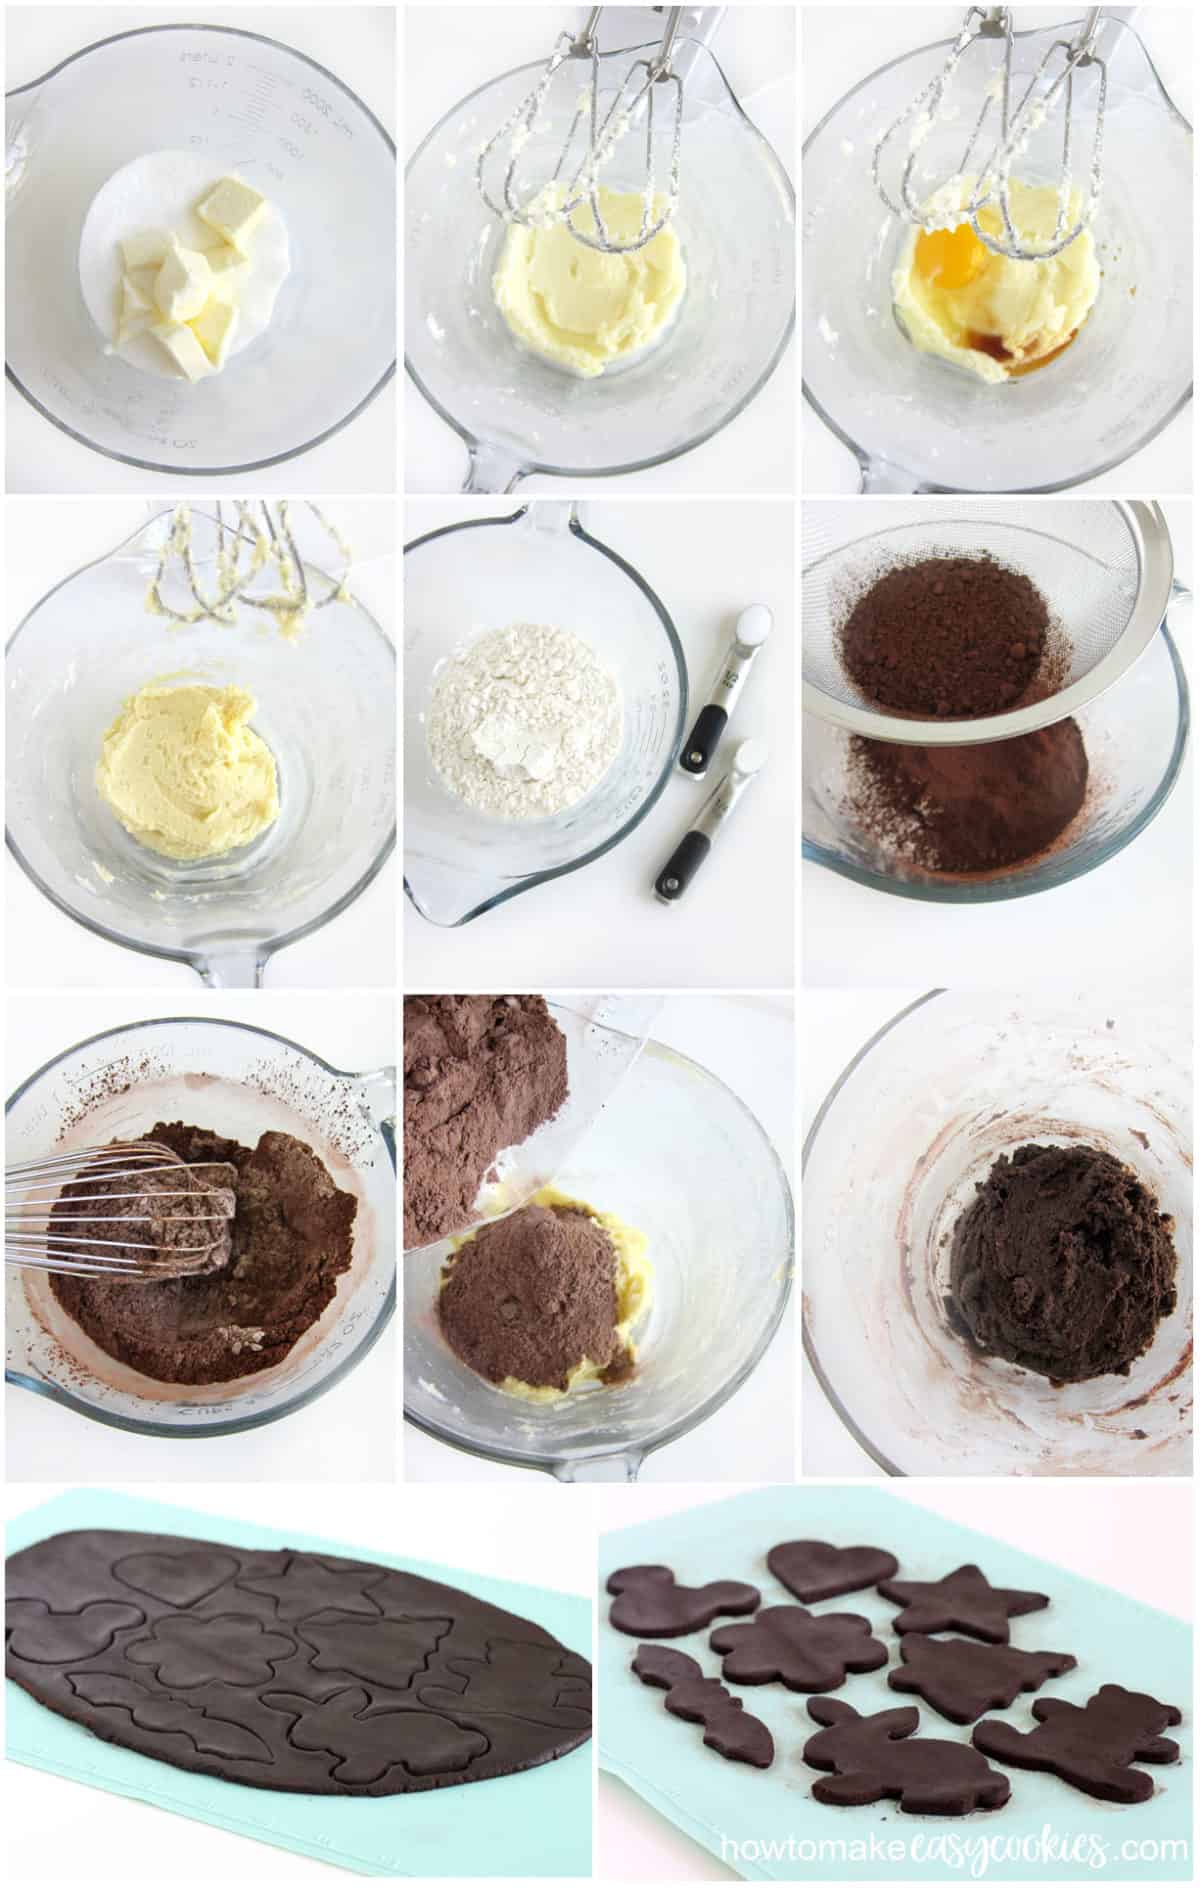 Beat butter and sugar, add egg and vanilla, then stir in flour, baking powder, salt, and cocoa powder to make chocolate cut-out cookie dough.